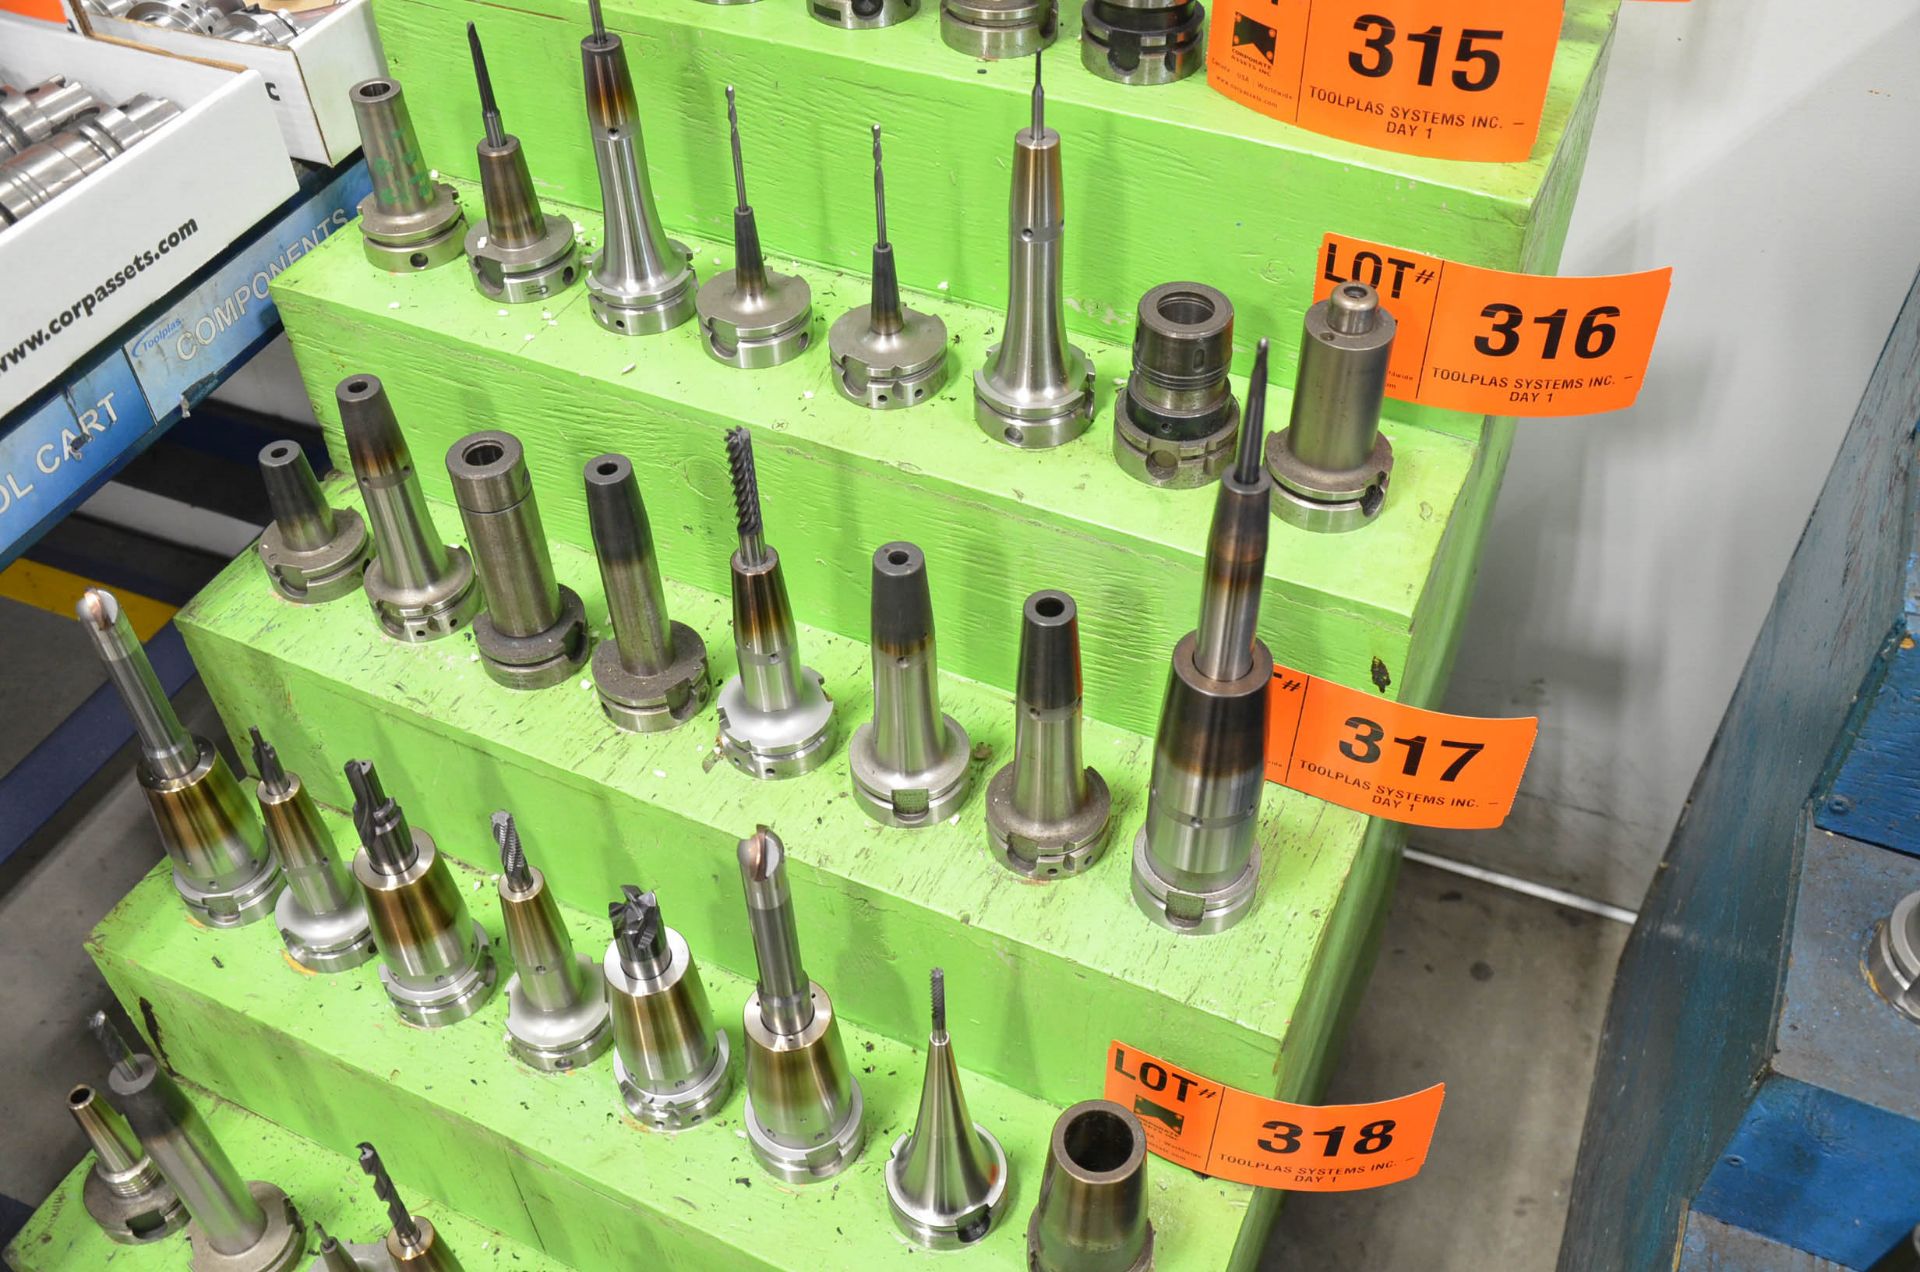 LOT/ (8) HSK-A63 TOOL HOLDERS